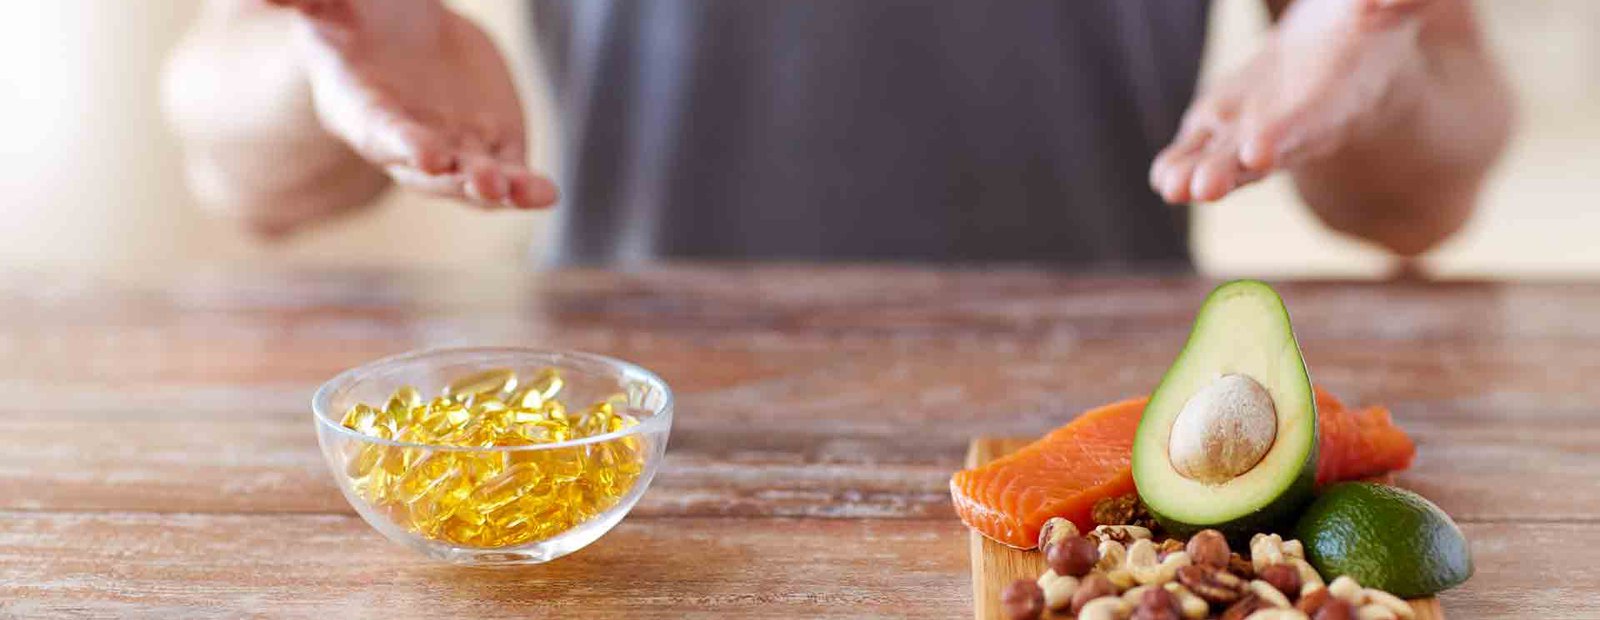 Food supplements: how to choose them